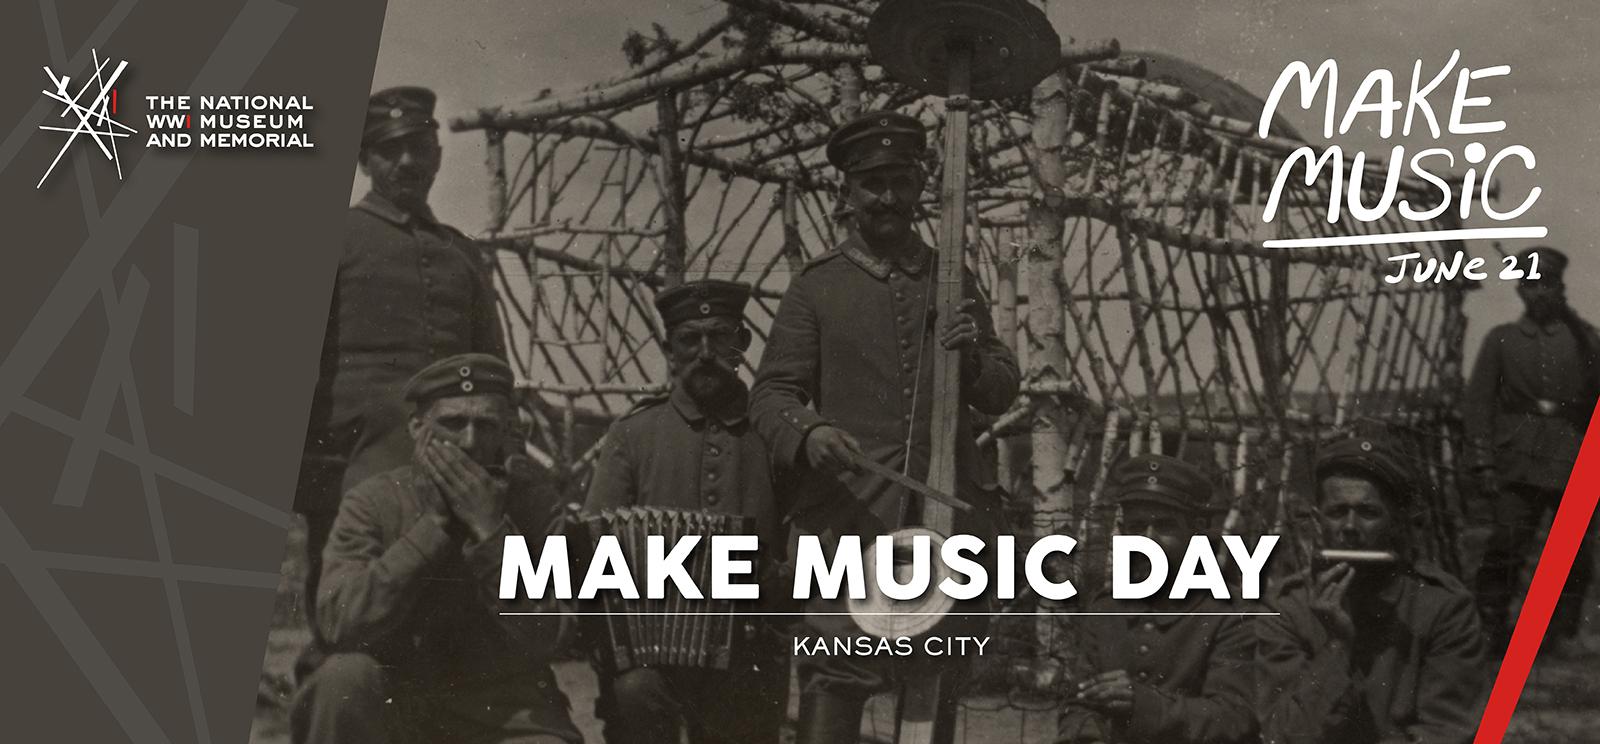 Image: black and white photograph of four men in WWI uniforms playing various band instruments. Text: 'Make Music Day / Kansas City'